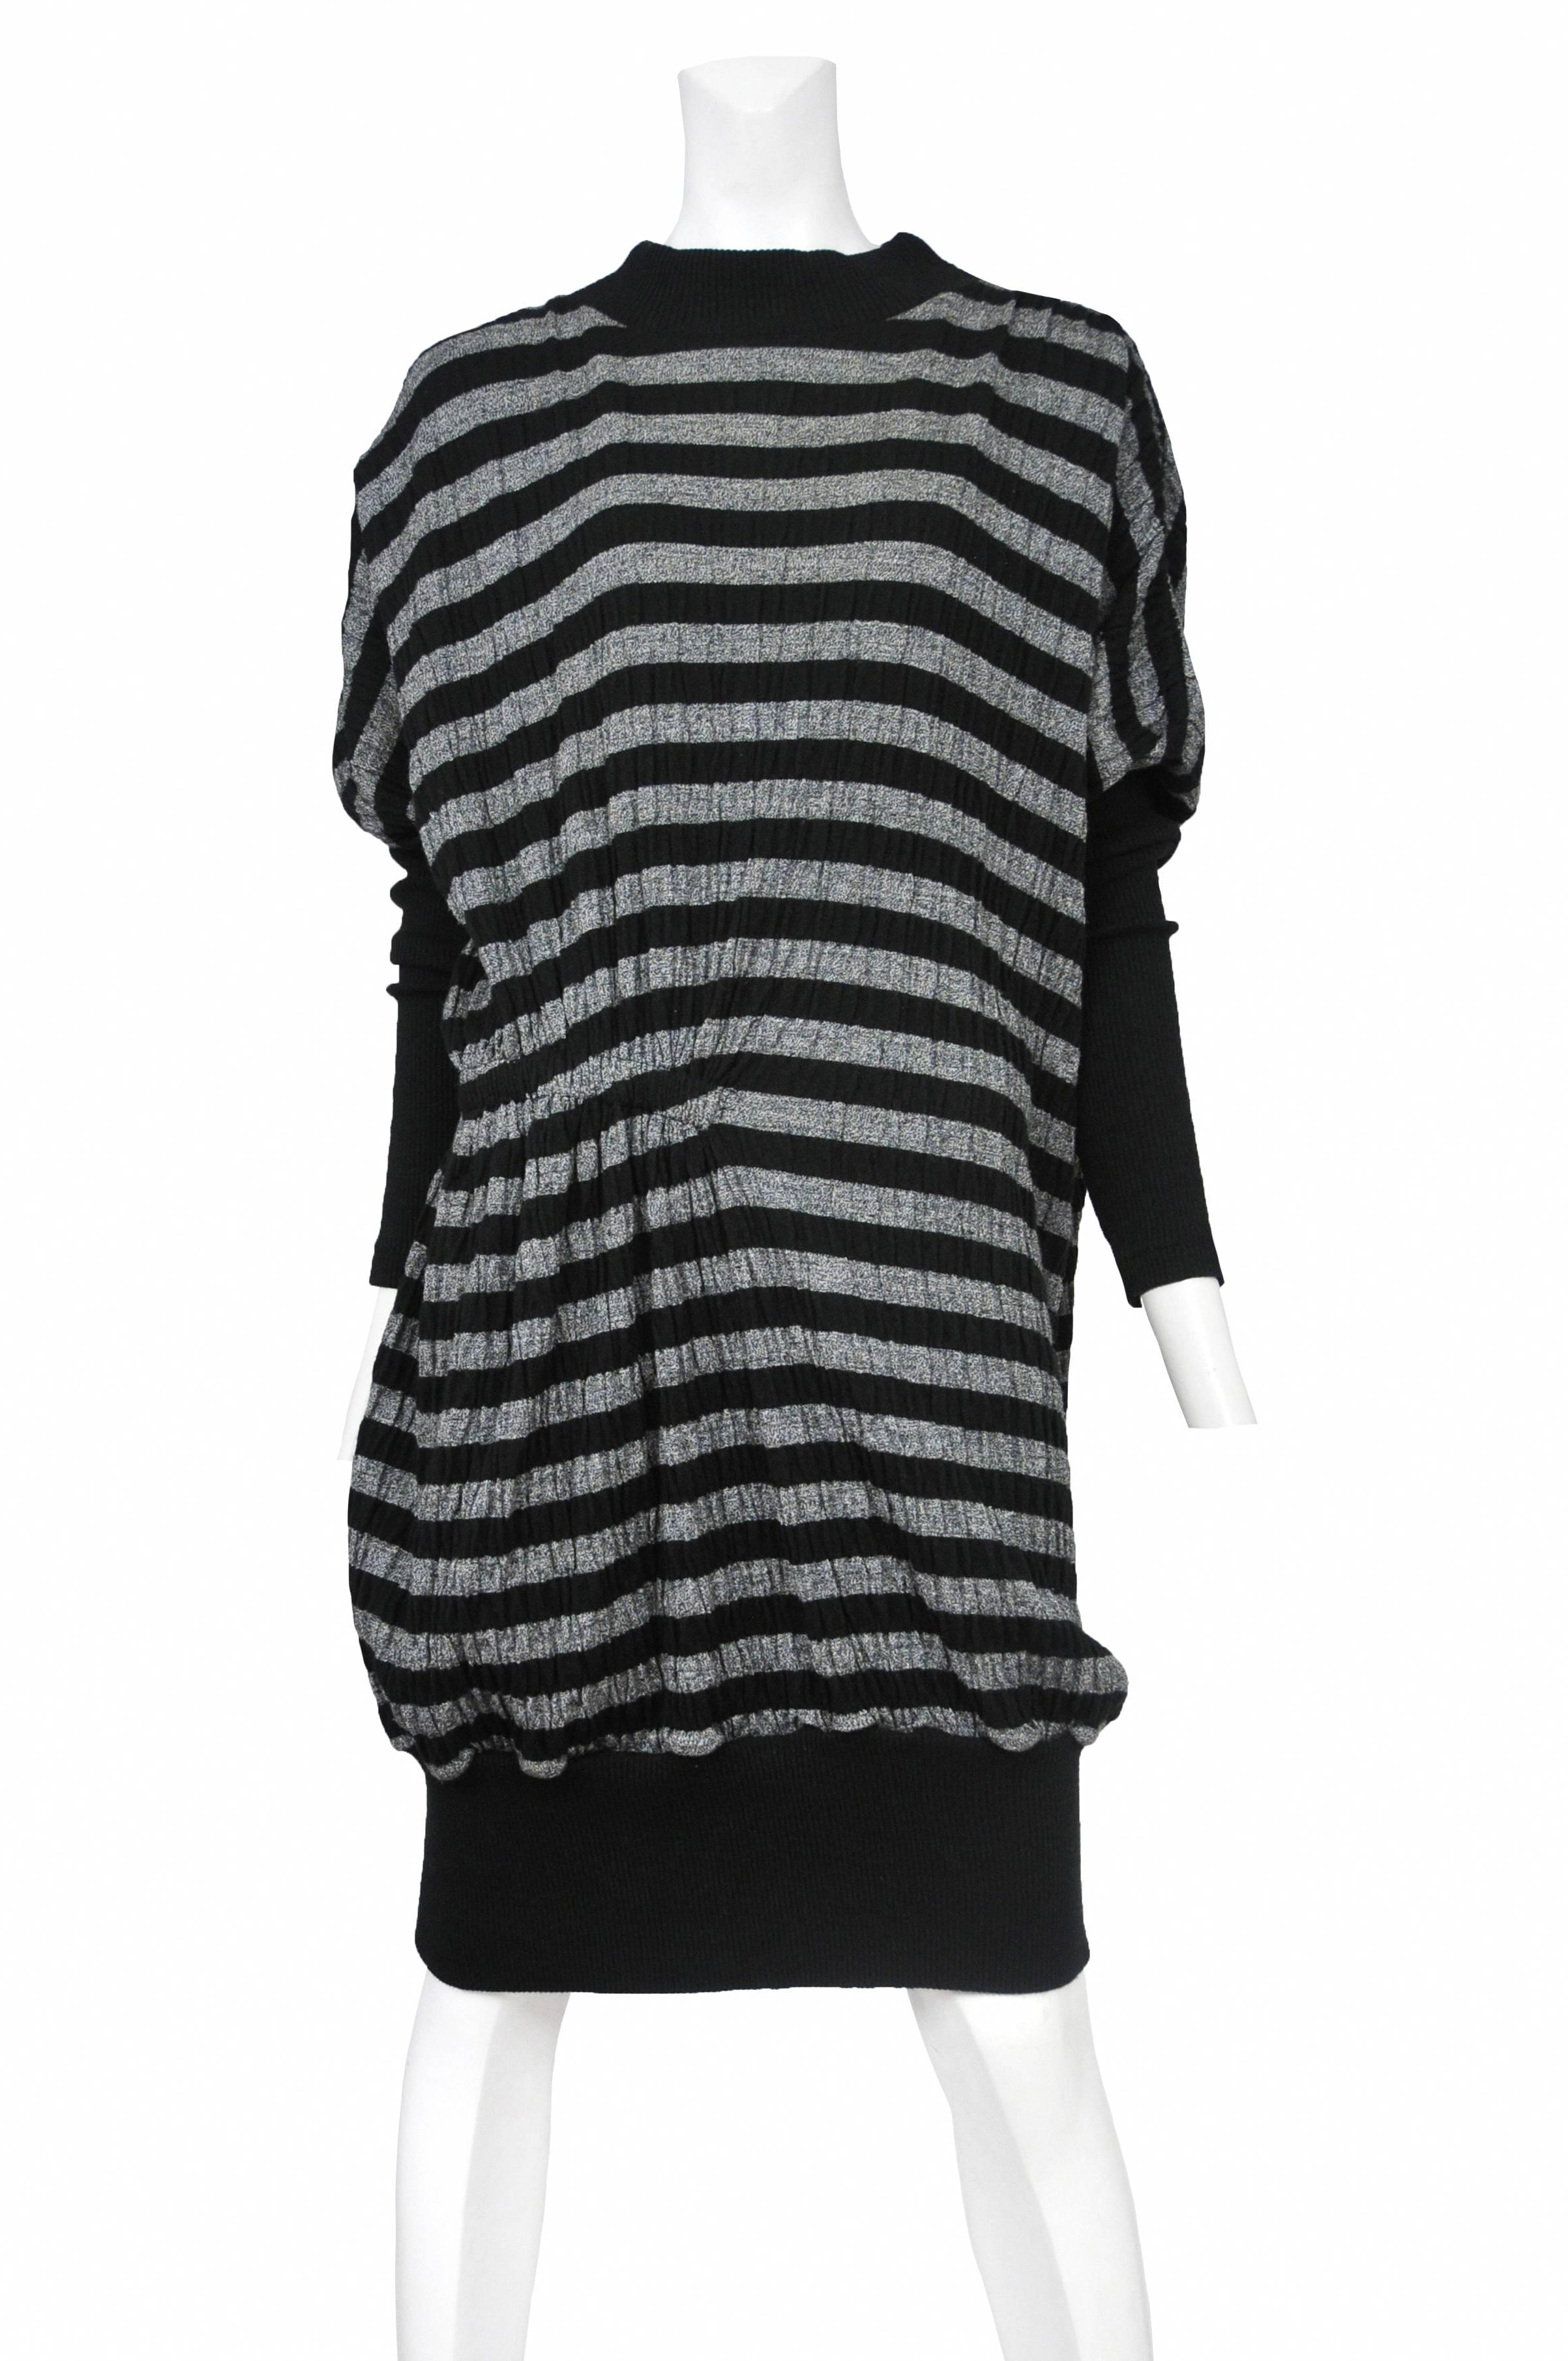 Vintage Issey Miyake wool blend crinkle long sleeve dress with black and grey horizontal stripes throughout body and black rib contrast at collar, sleeves and hem.
Please inquire for additional images.